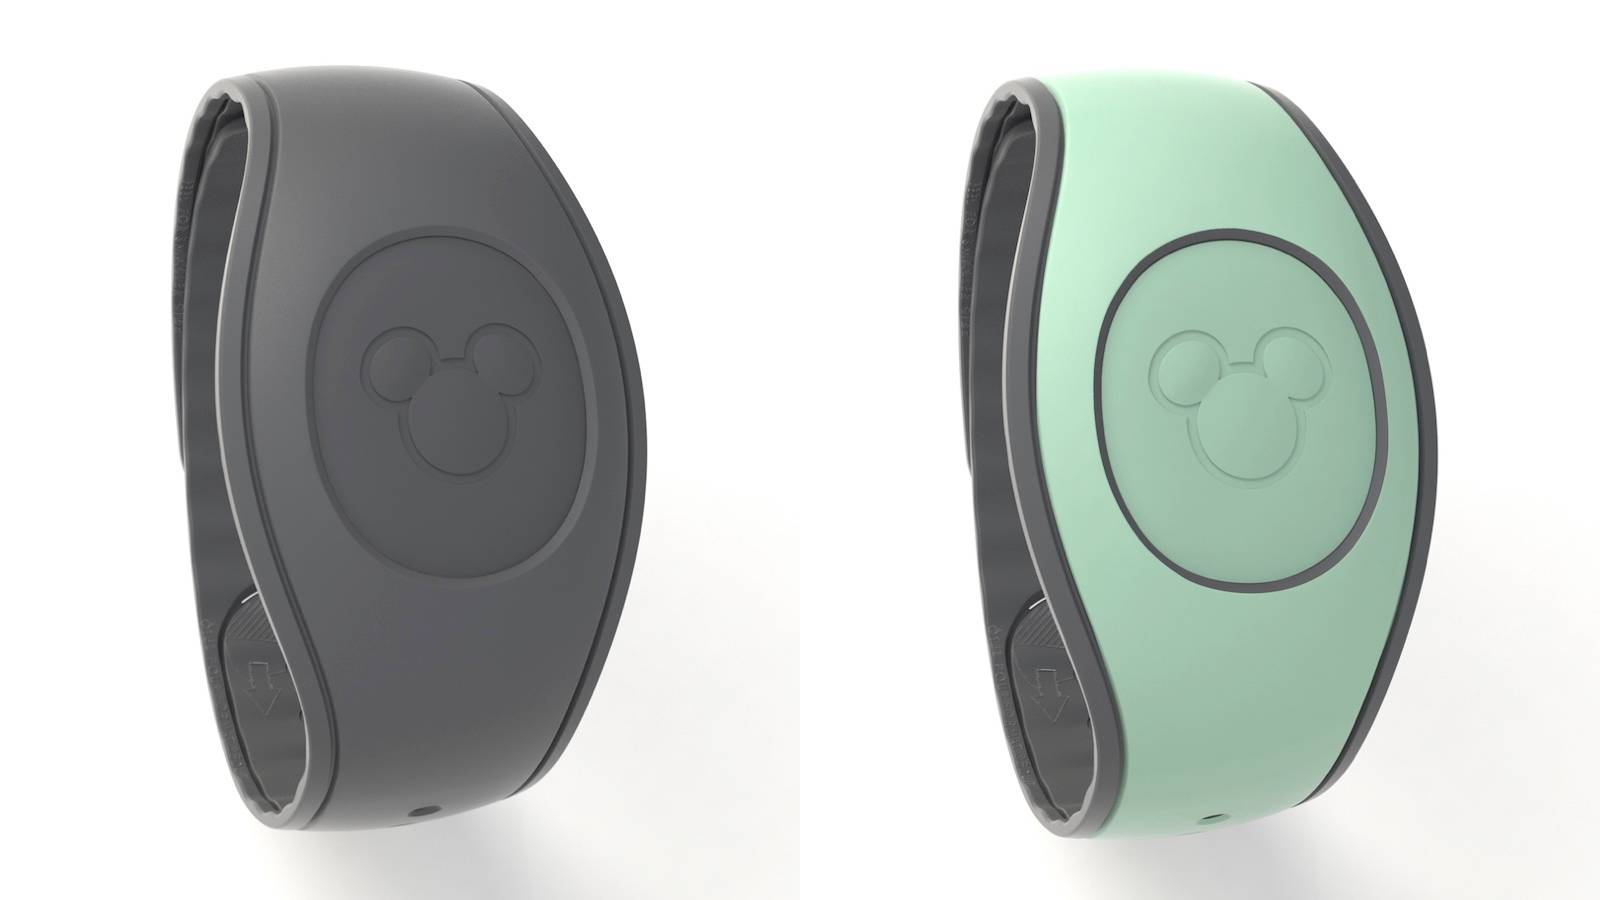 MagicBands may be replaced by Apple Watch and similar devices